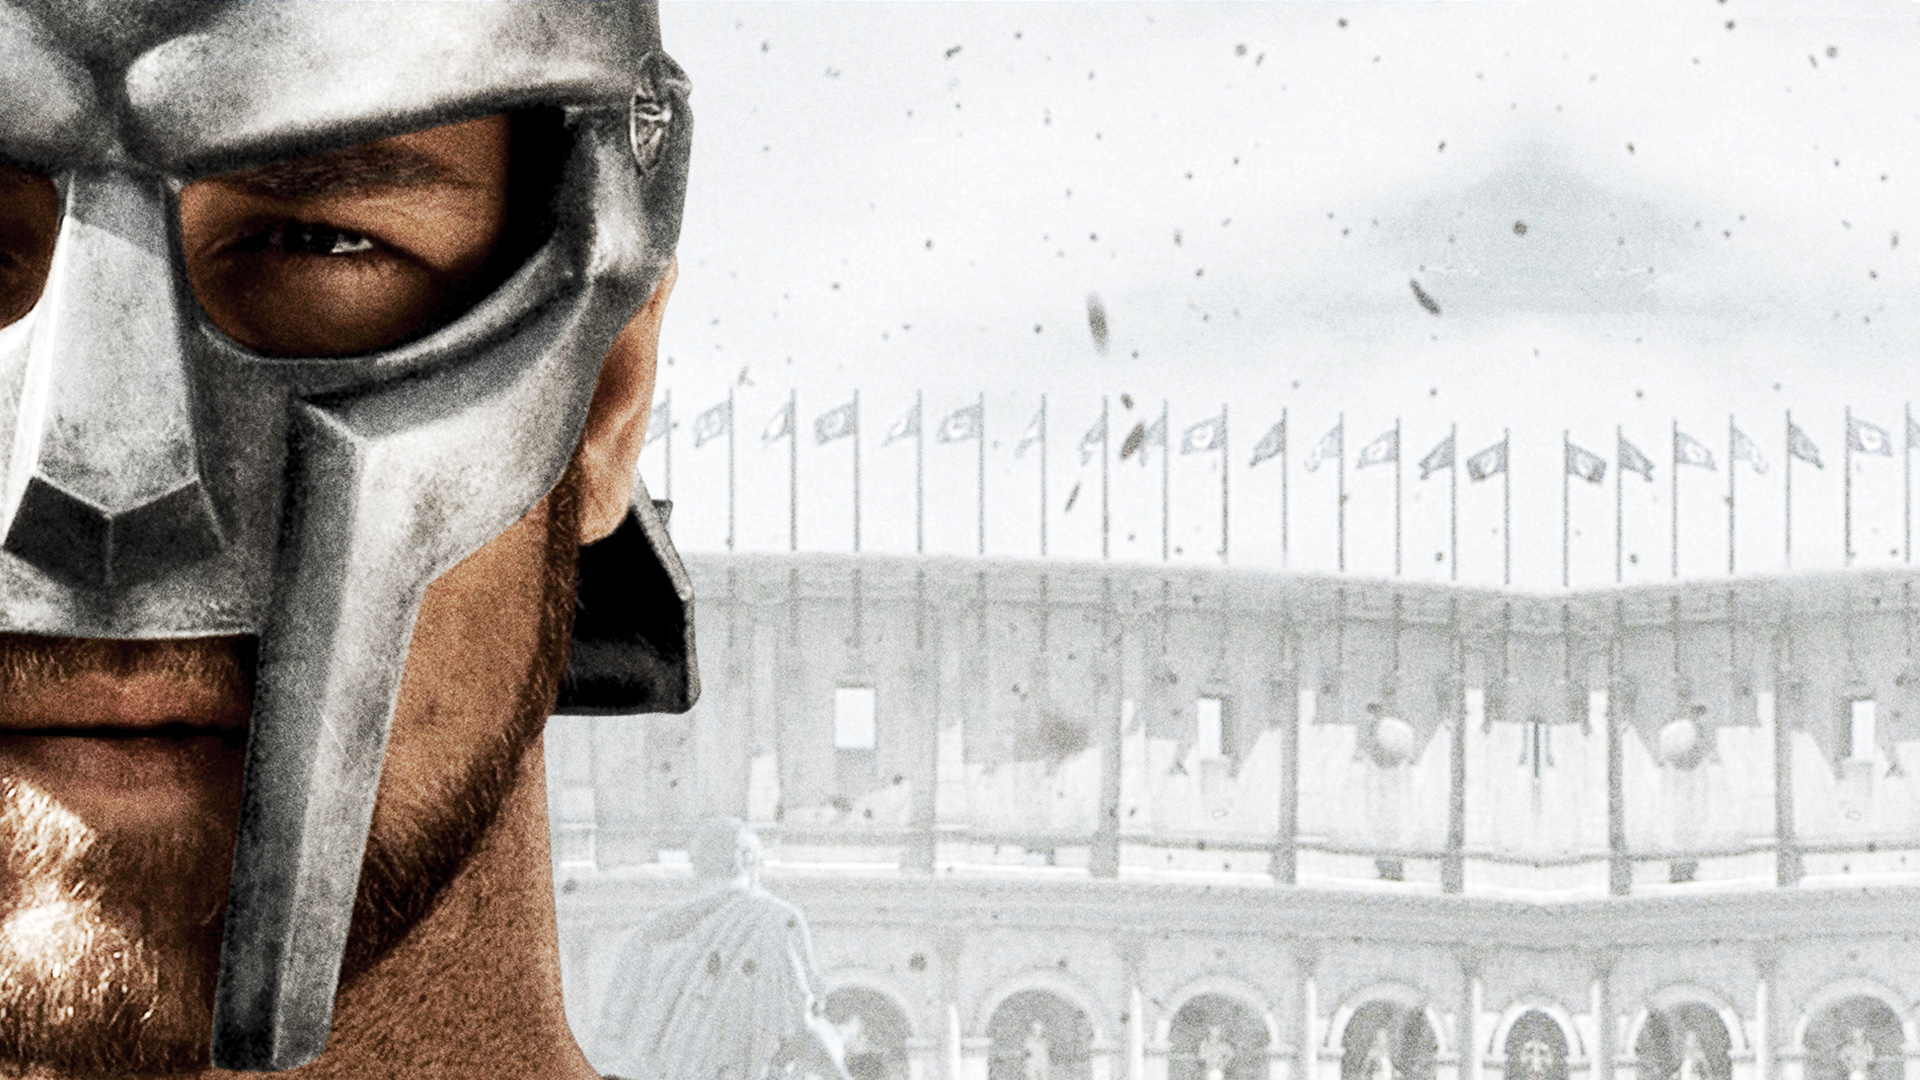 Image Gladiator Wallpaper Pc, Android, Iphone And Ipad - Gladiator Wallpaper Hd , HD Wallpaper & Backgrounds